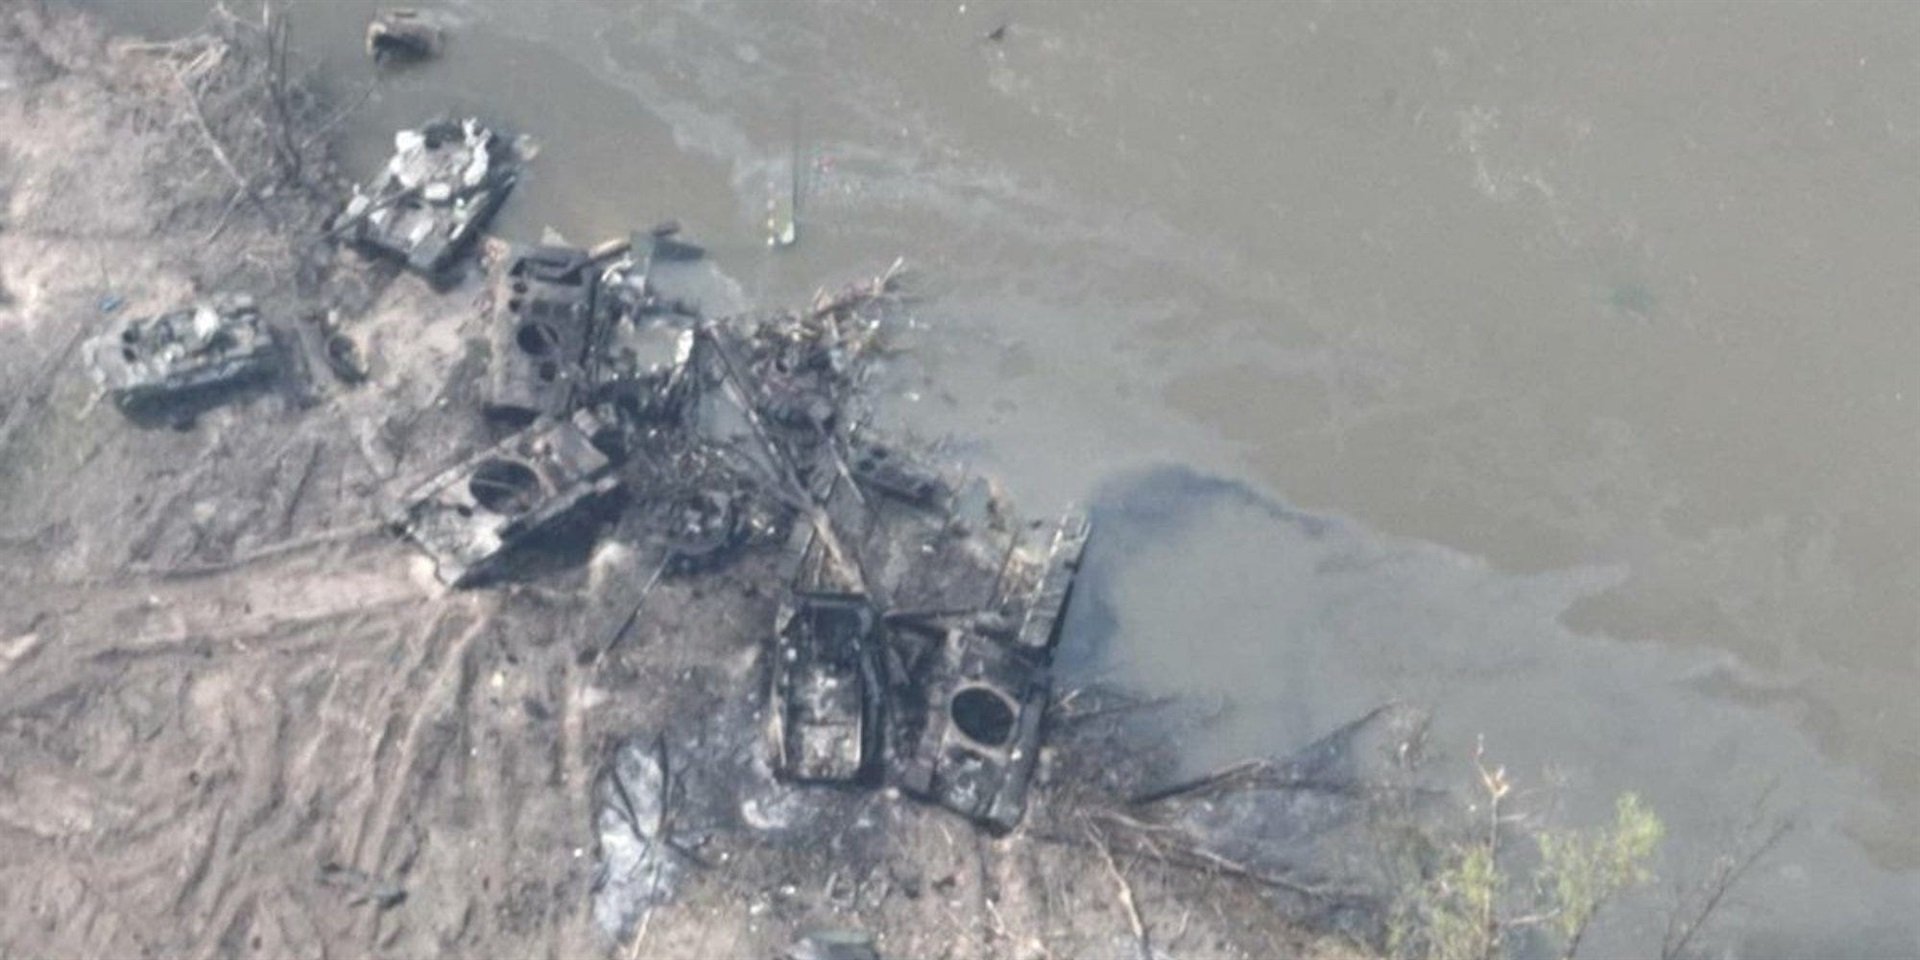 An image shared by Ukraine's defense ministry showing Russian equipment destroyed near the Siverskyi Donets River.